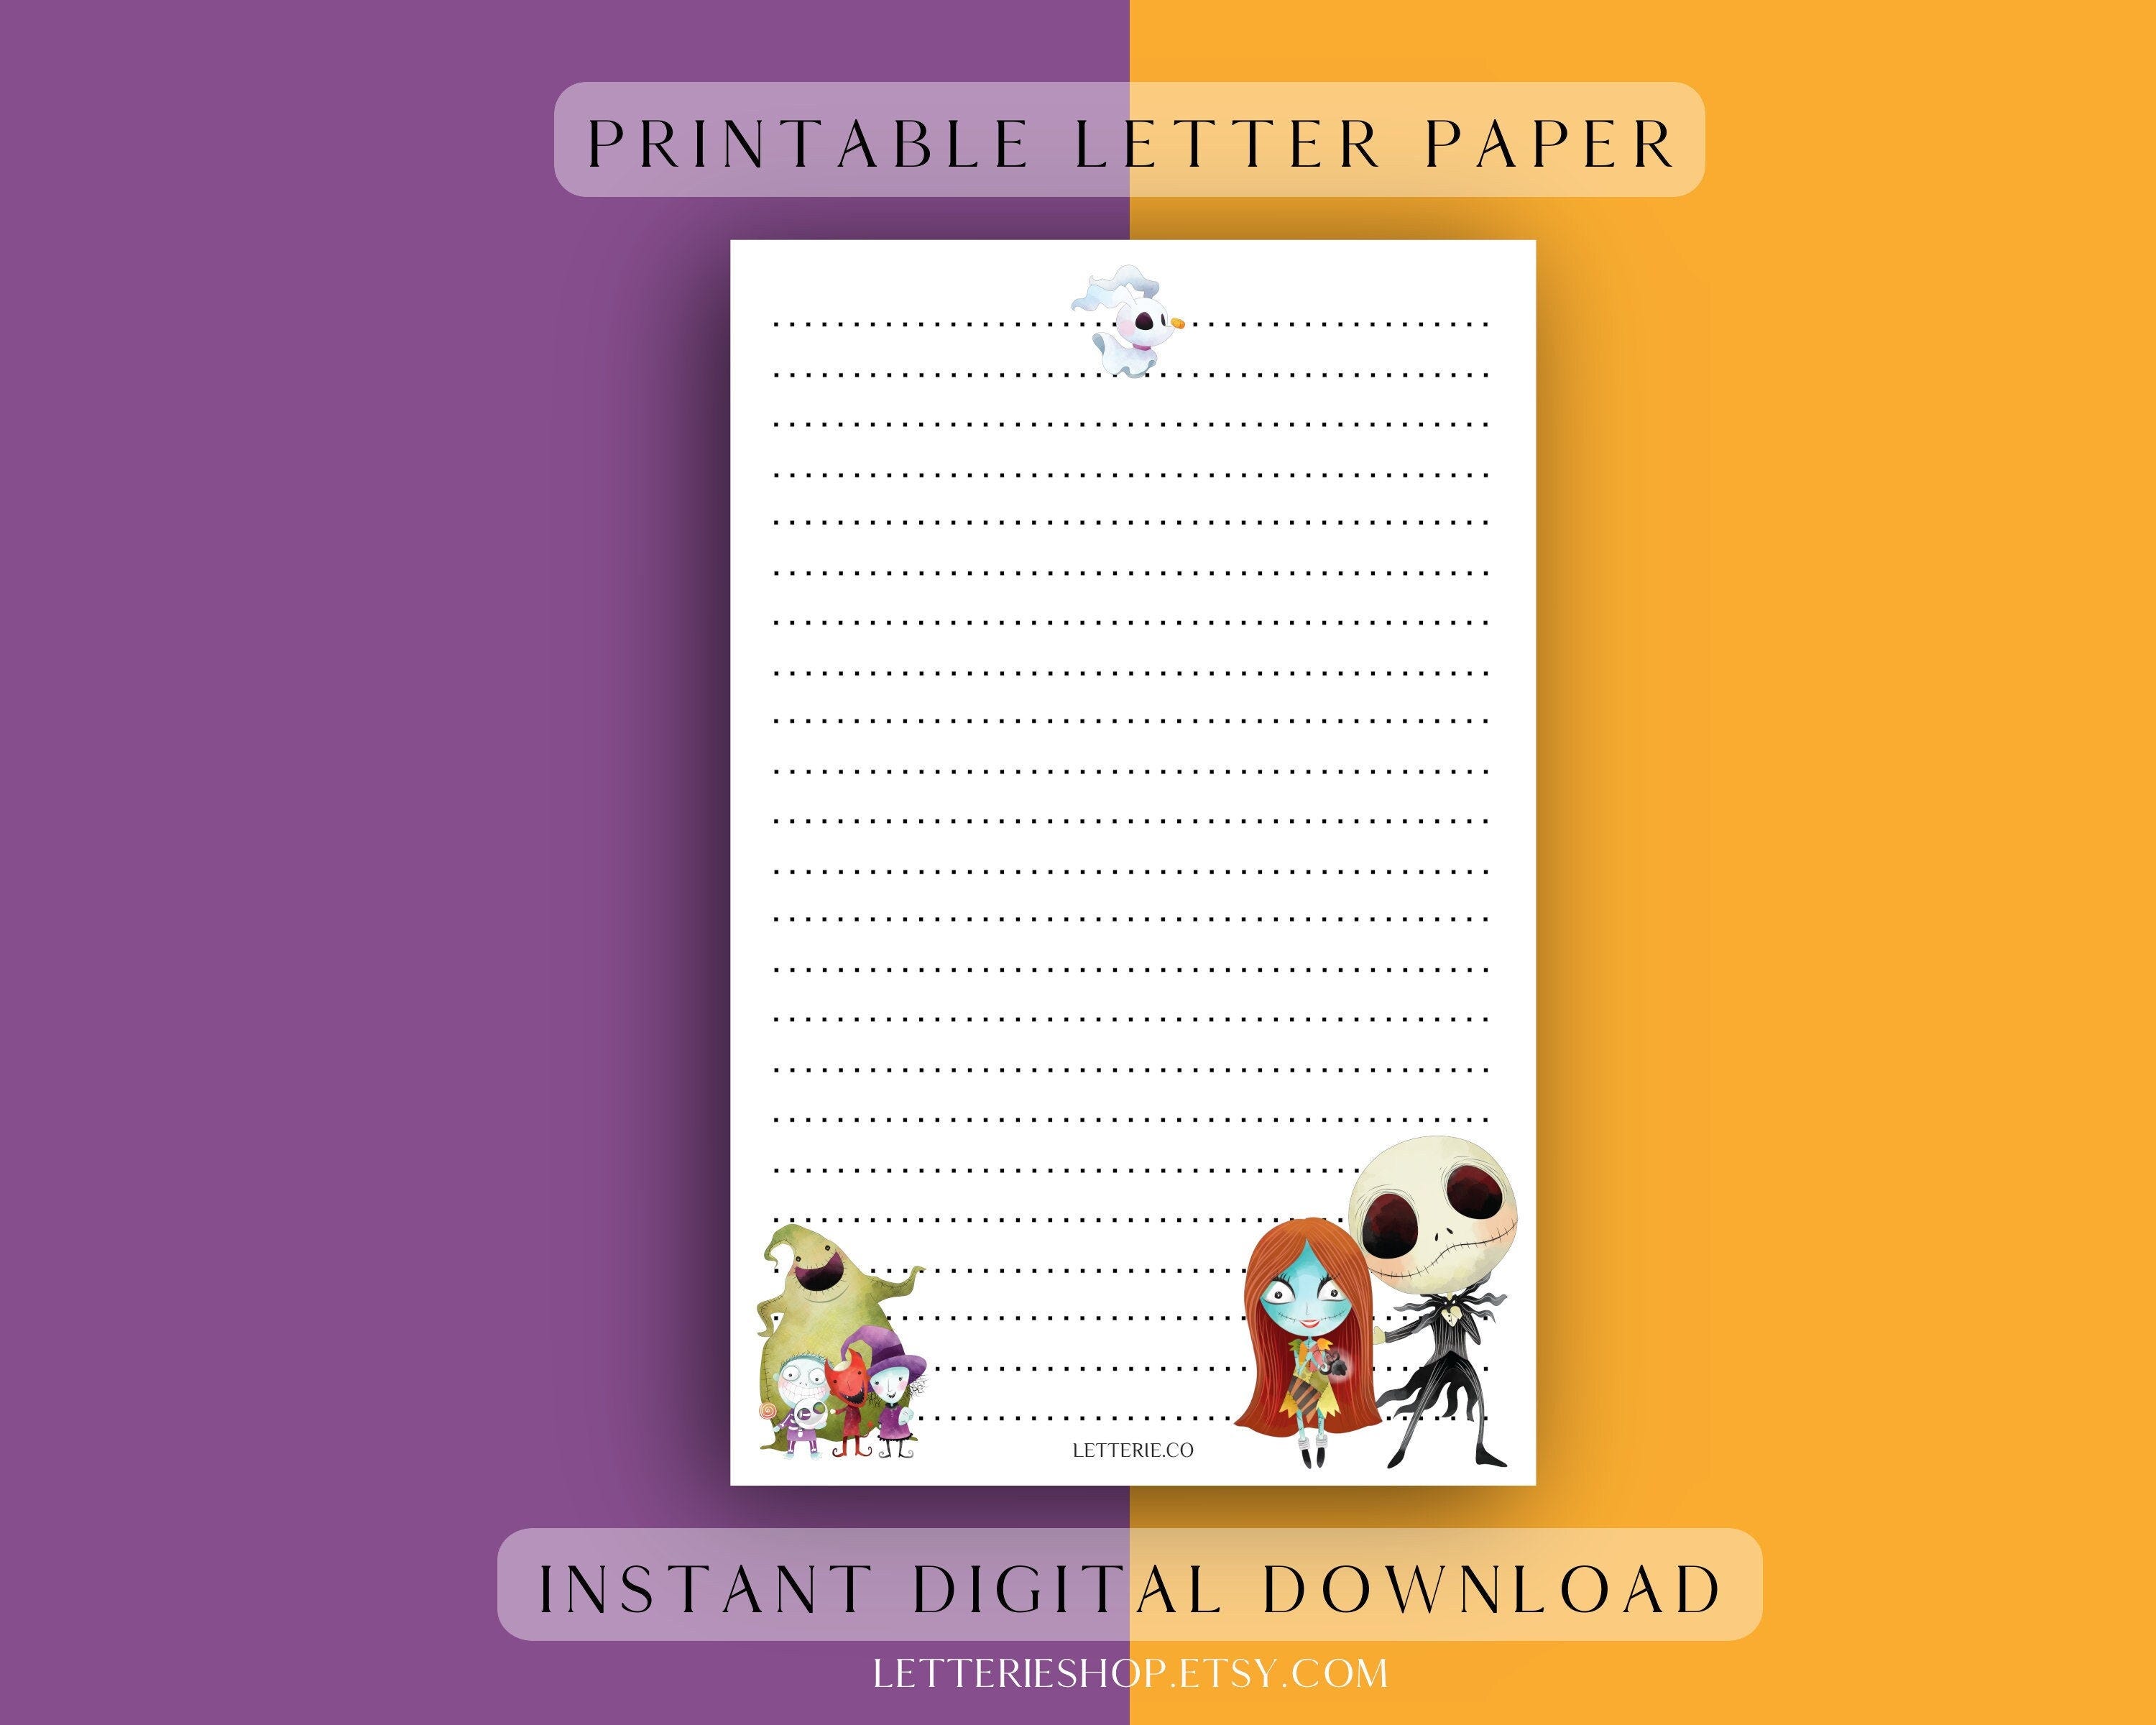 NIGHTMARE BEFORE CHRISTMAS / Letter Writing Paper / Instant Download / Halloween Stationery / Snail mail / Pen-pal / Digital Paper / Cute